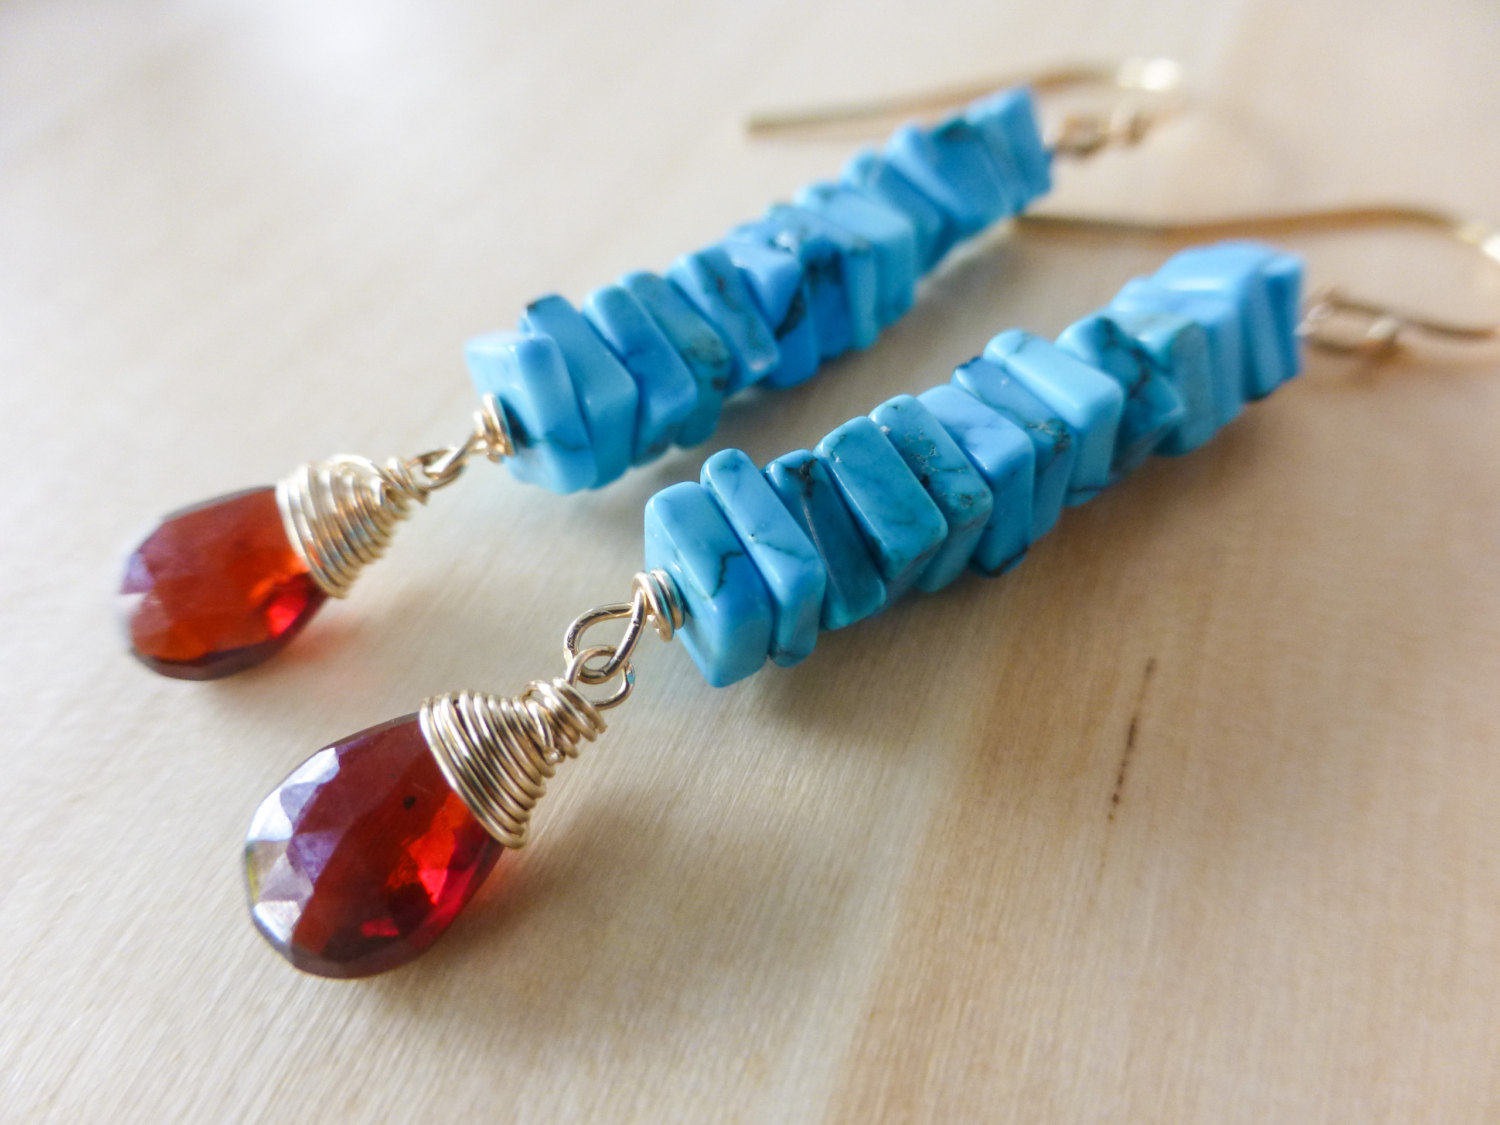 Blue Turquoise and Red Garnet Bar Earrings in Gold Filled